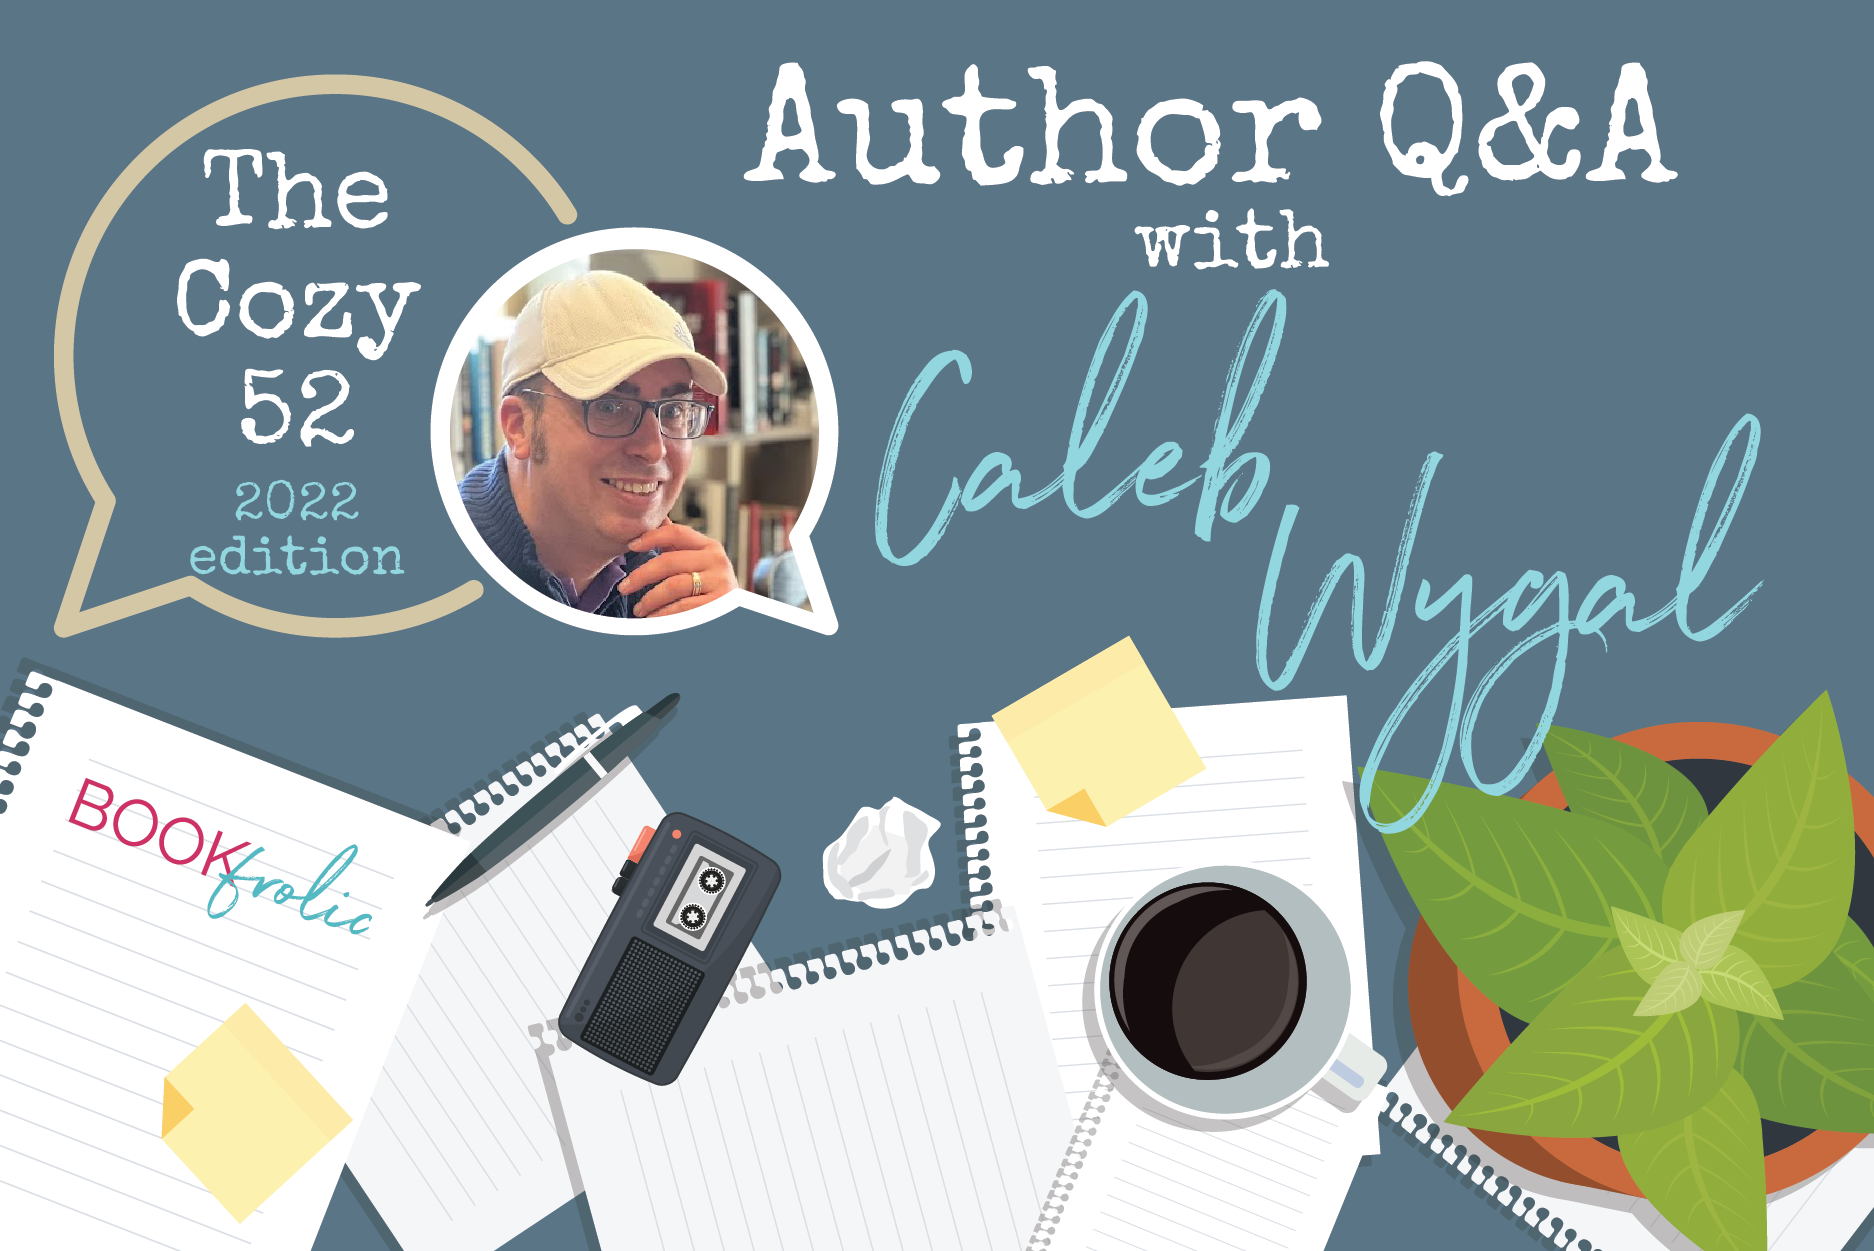 banner for The Cozy 52 interview with Caleb Wygal